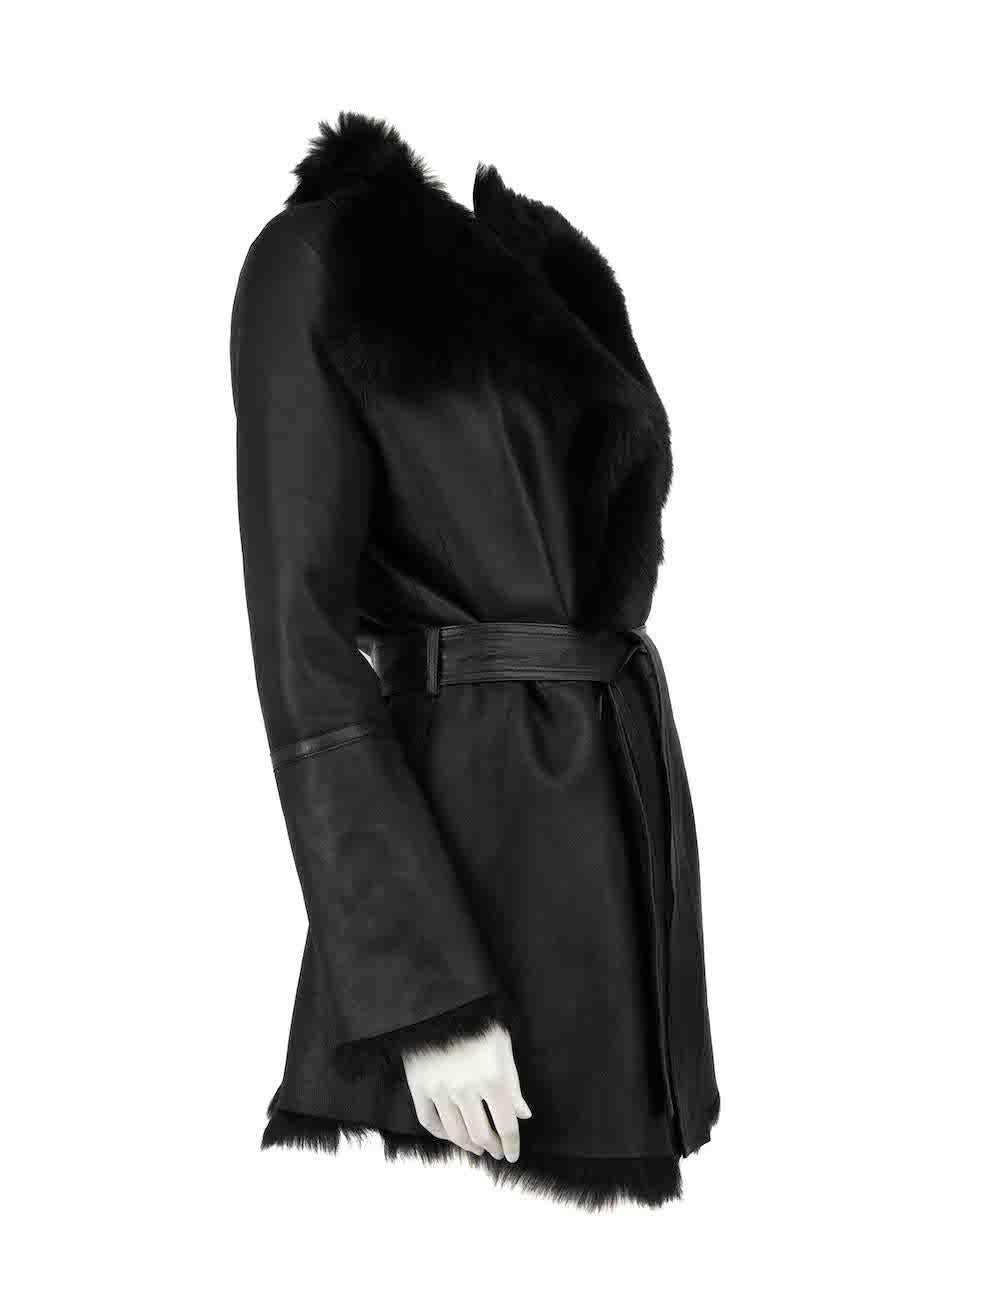 CONDITION is Very good. Hardly any visible wear to coat is evident on this used Joseph designer resale item. Please note that the brand label is missing but the brand is Joseph
 
Details
Black
Leather and shearling fur
Reversible coat
Belted
2x Side